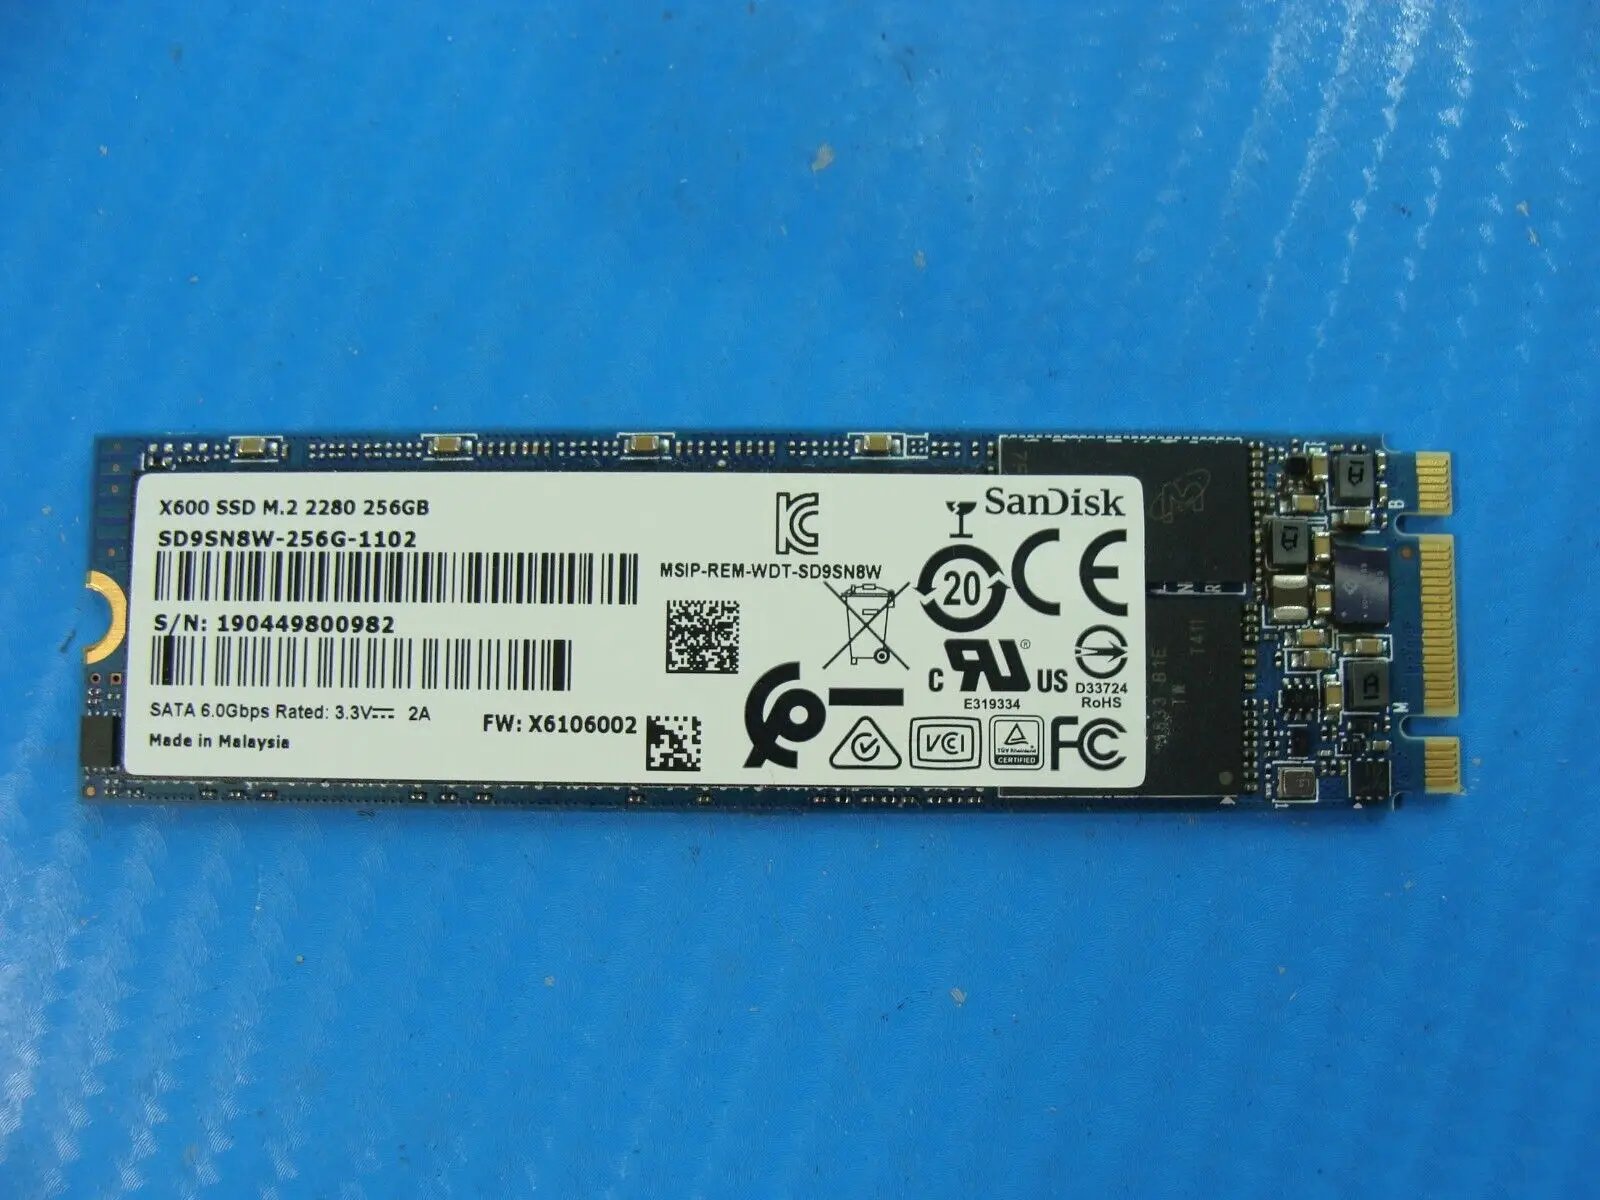 Asus S530FA SanDisk M.2 NVMe 256GB SSD Solid State Drive SD9SN8W-256G-1102